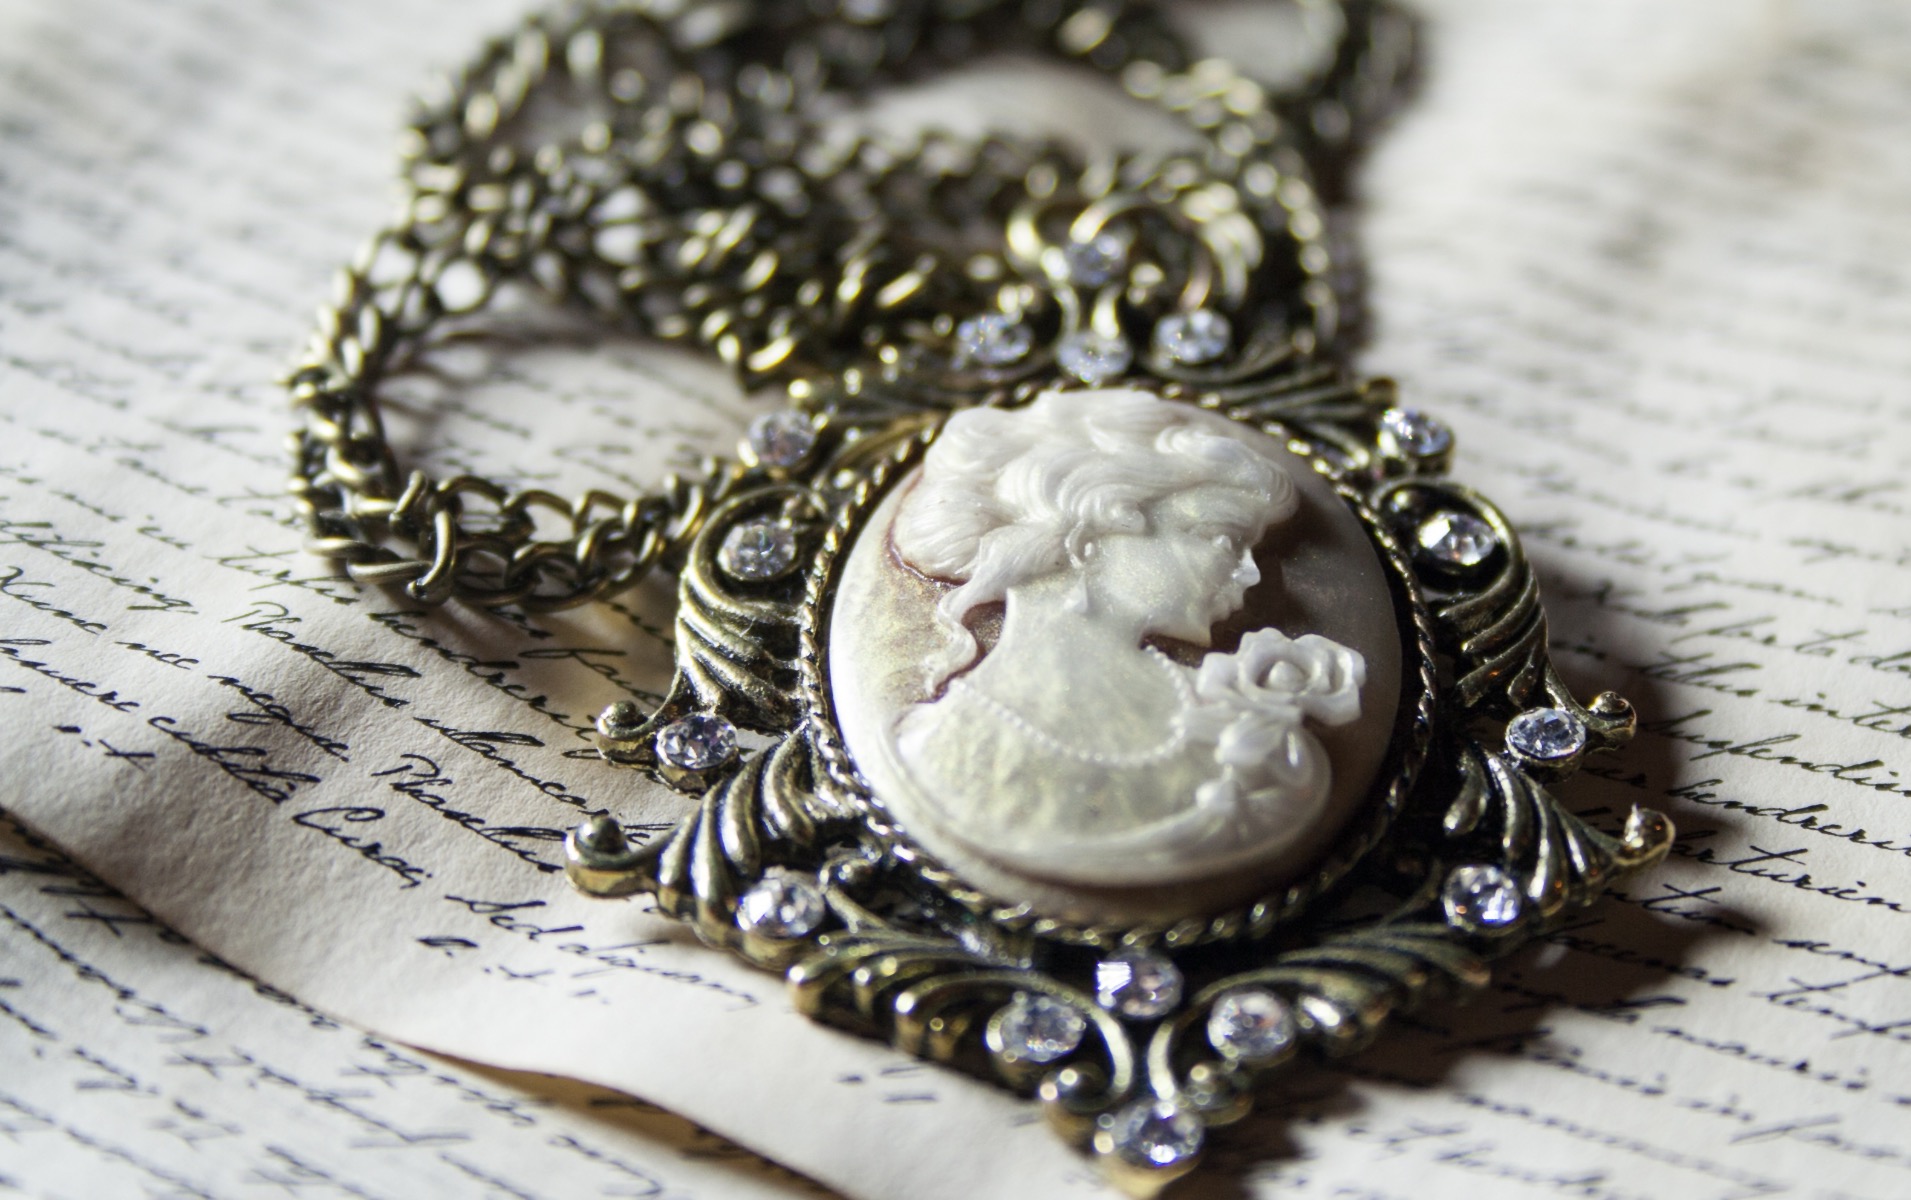 Antique cameo necklace over handwritten letters